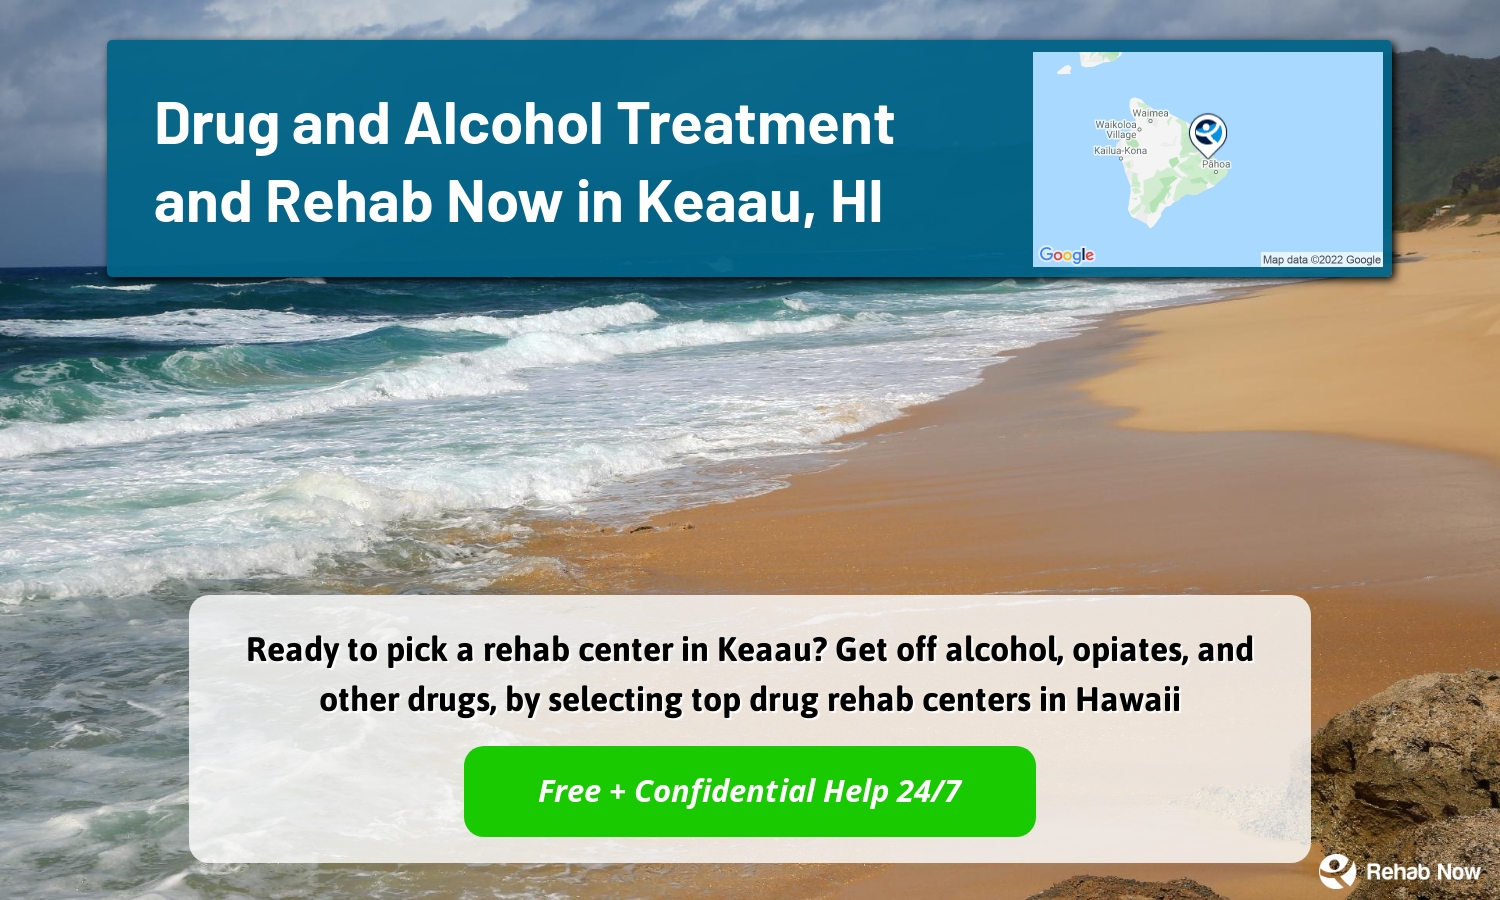 Ready to pick a rehab center in Keaau? Get off alcohol, opiates, and other drugs, by selecting top drug rehab centers in Hawaii